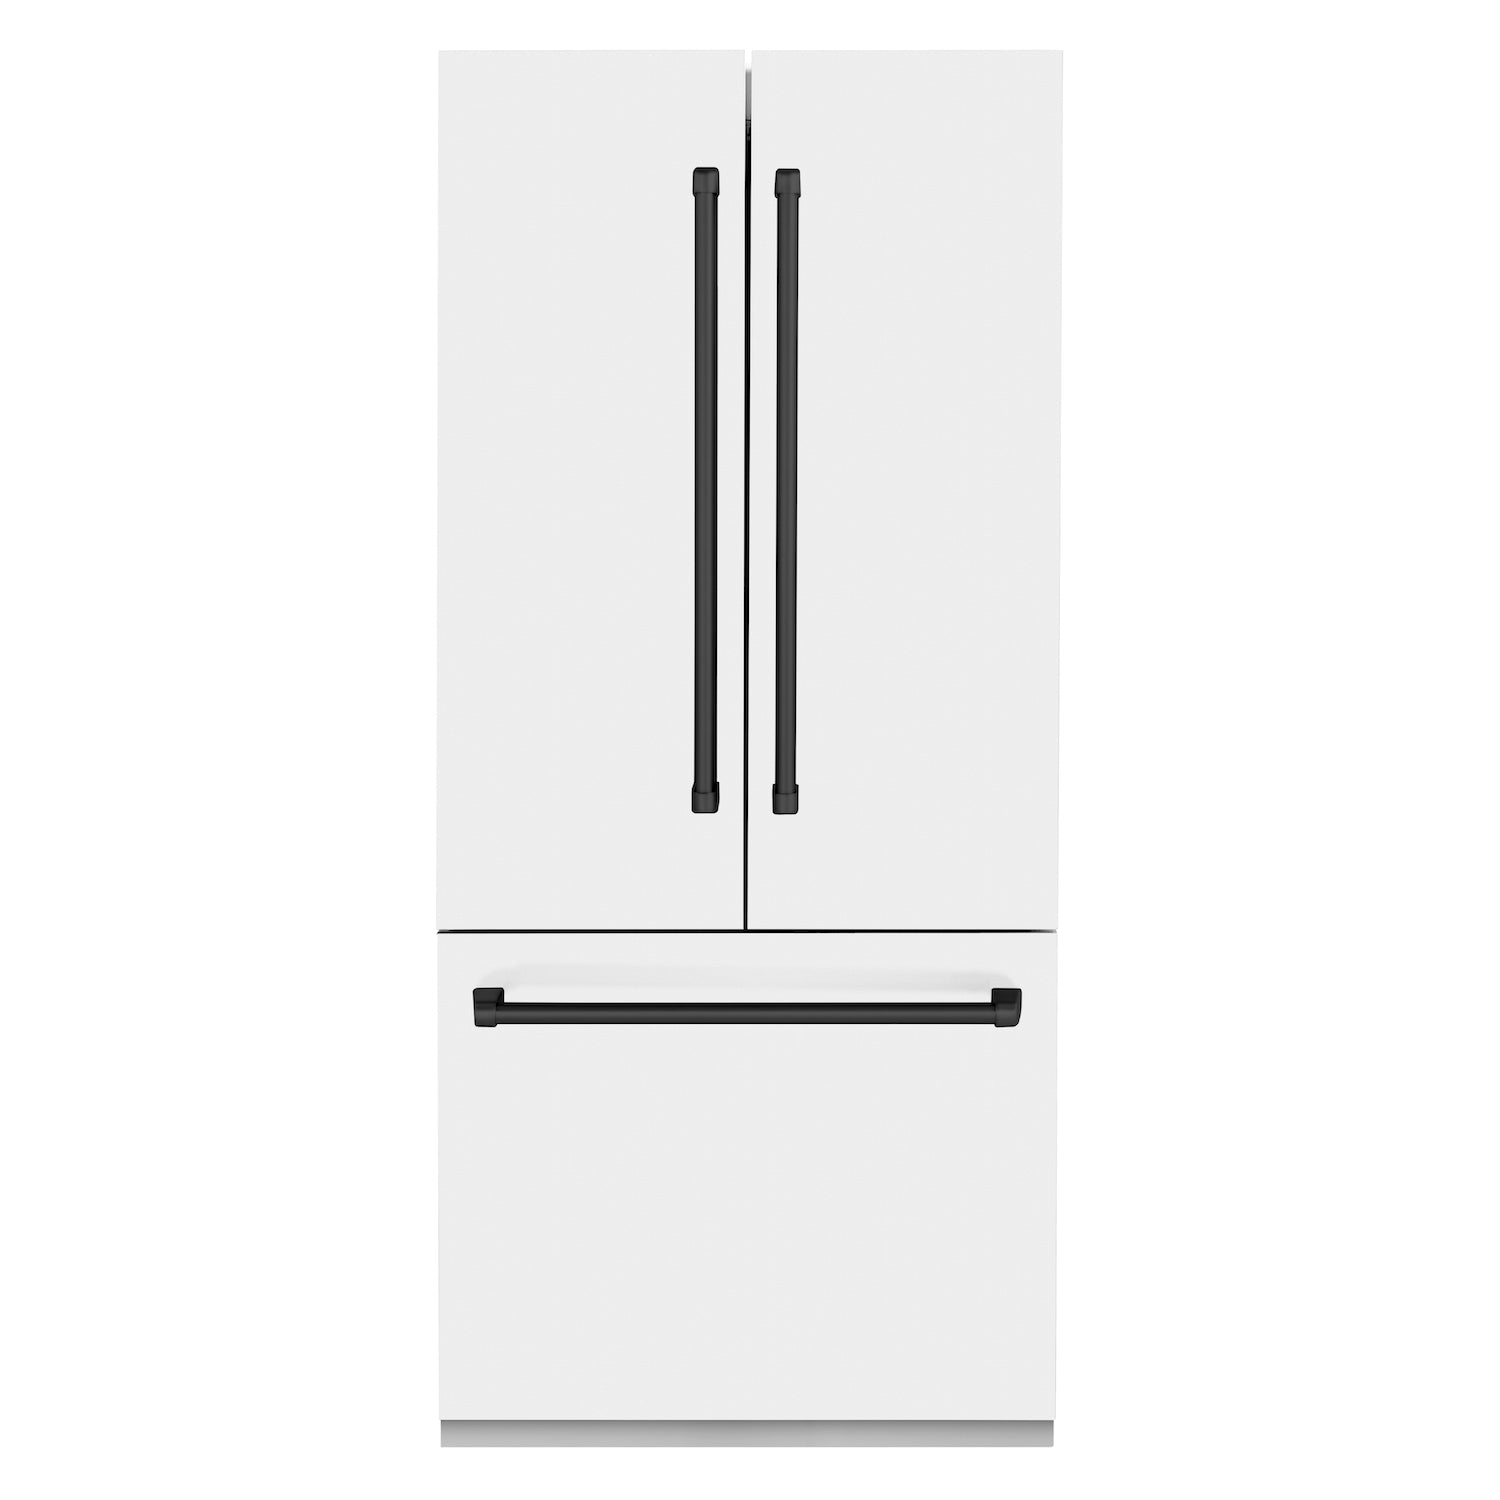 ZLINE Autograph Edition 36 in. 19.6 cu. ft. Built-in 2-Door Bottom Freezer Refrigerator with Internal Water and Ice Dispenser in White Matte with Matte Black Accents (RBIVZ-WM-36-MB)